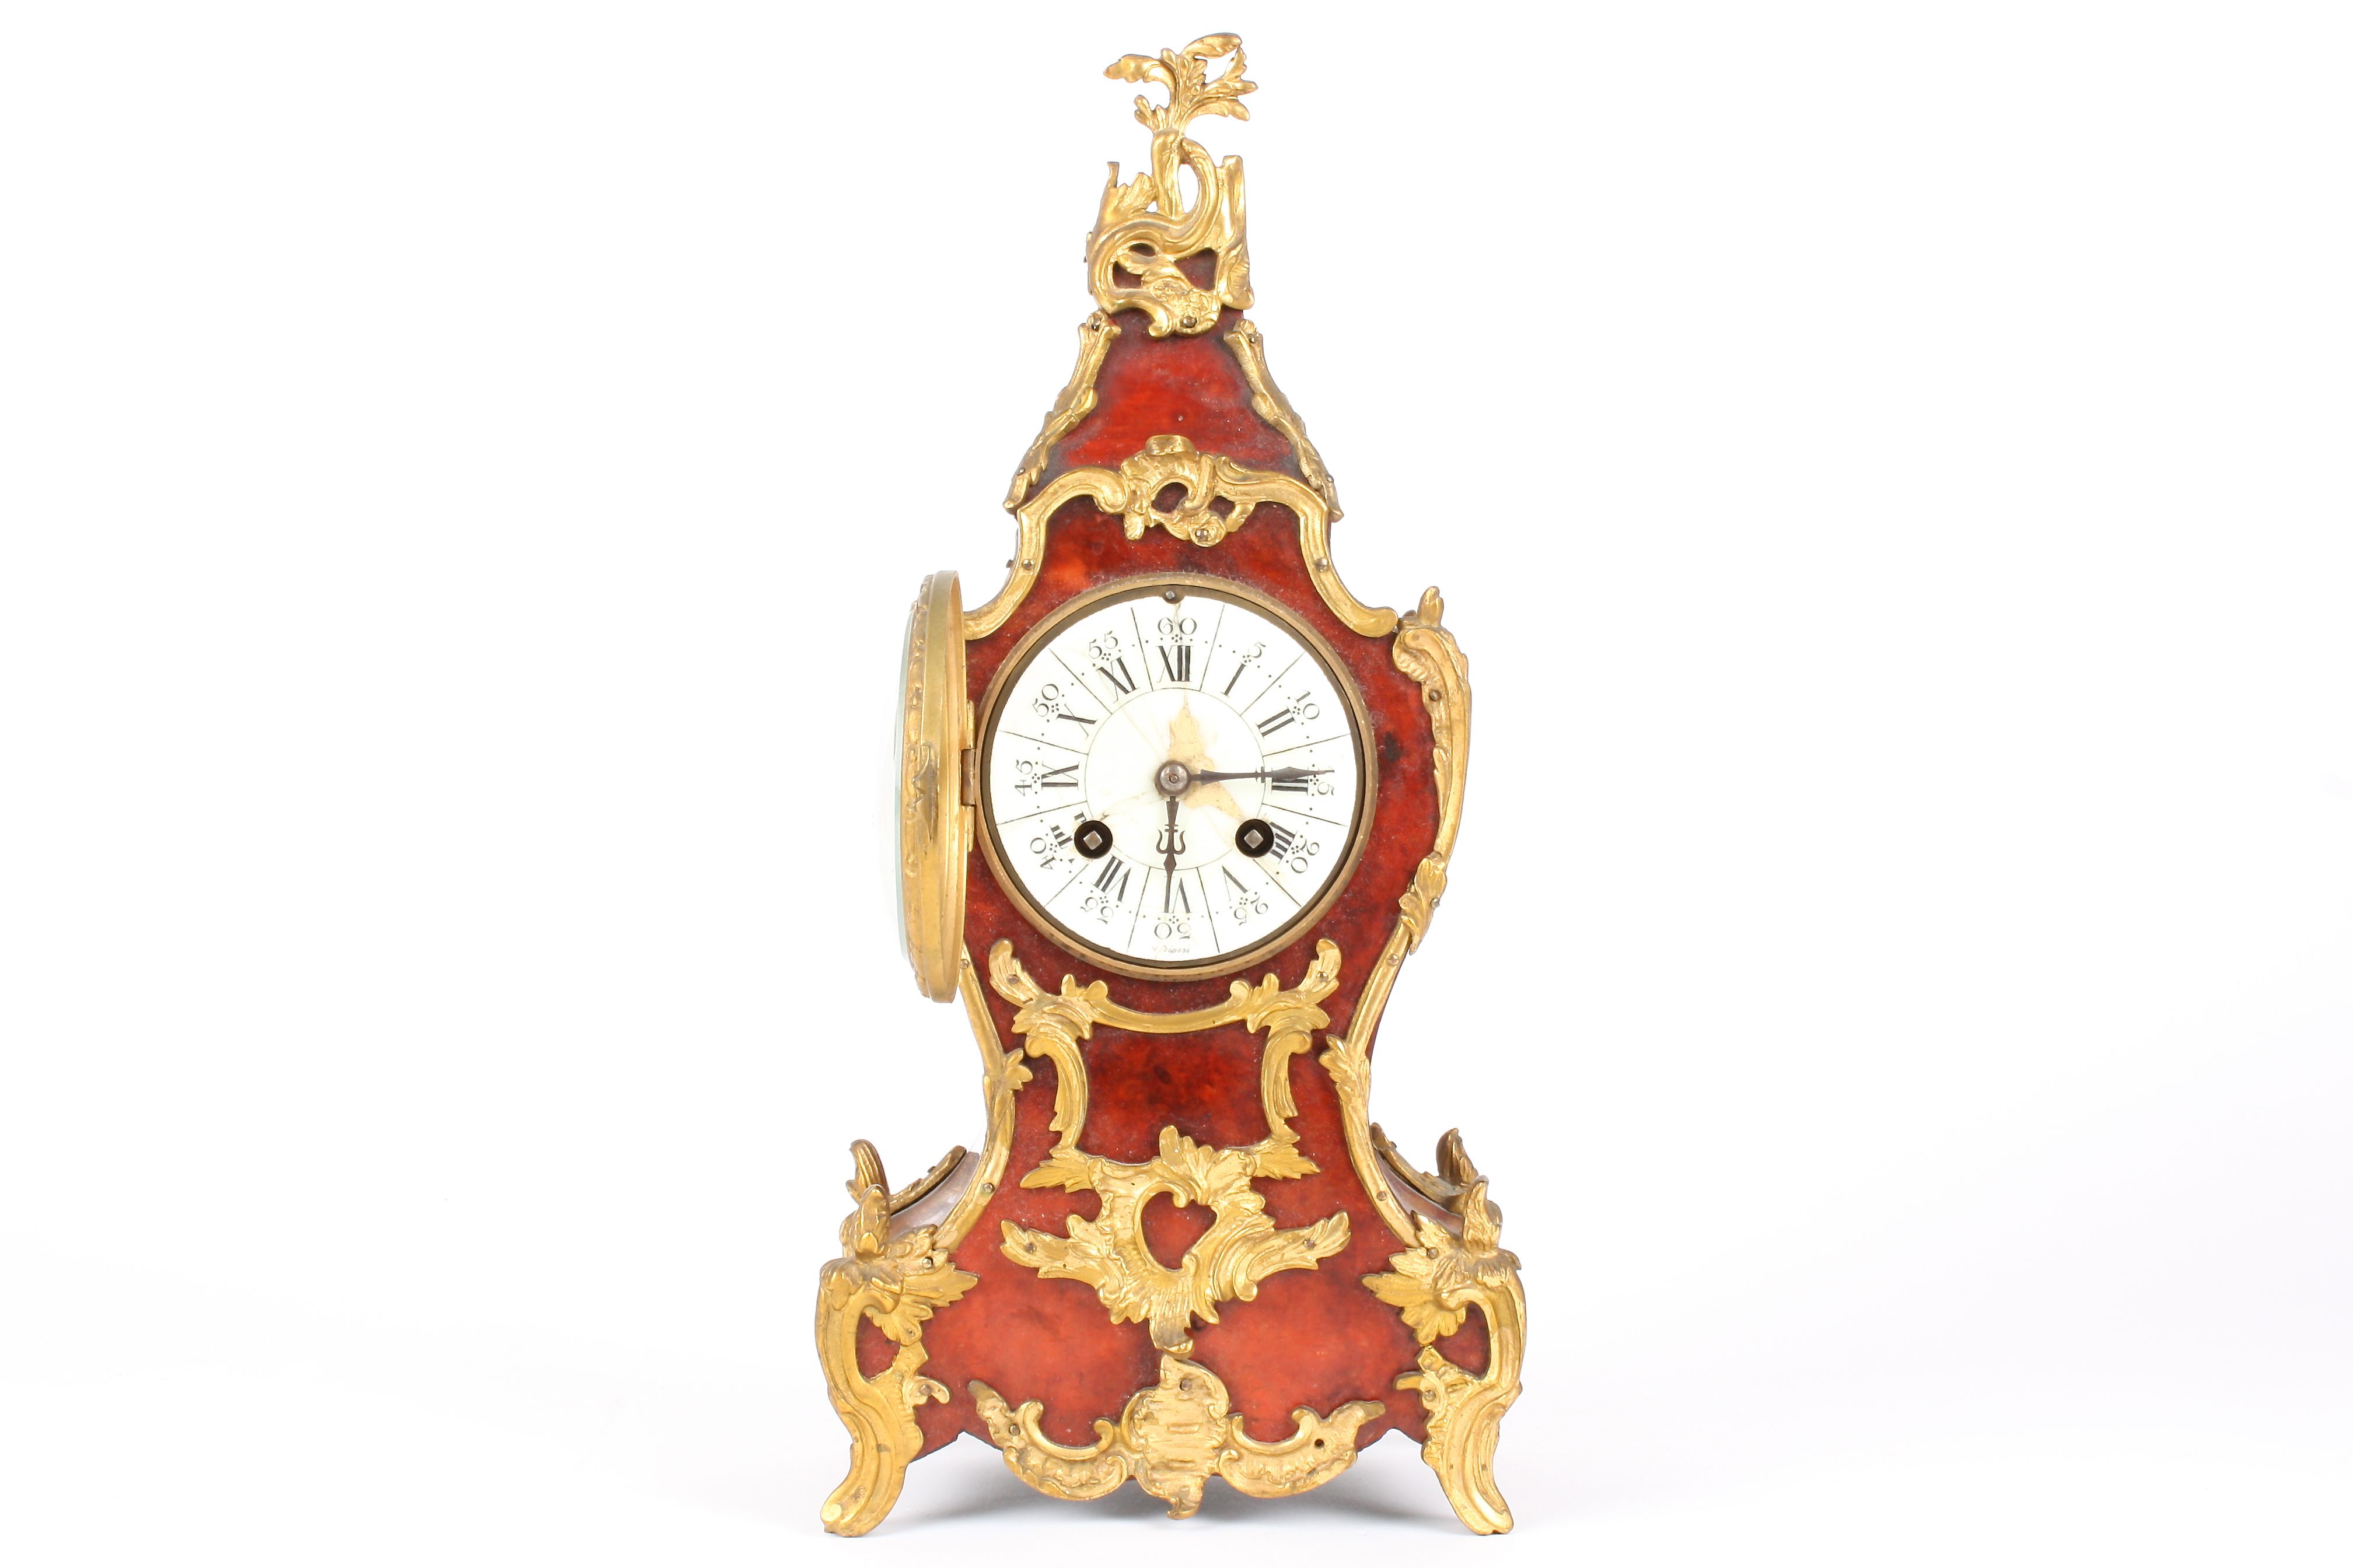 A 19th century French tortoiseshell and ormolu mounted mantel clock
the white enamel dial with black